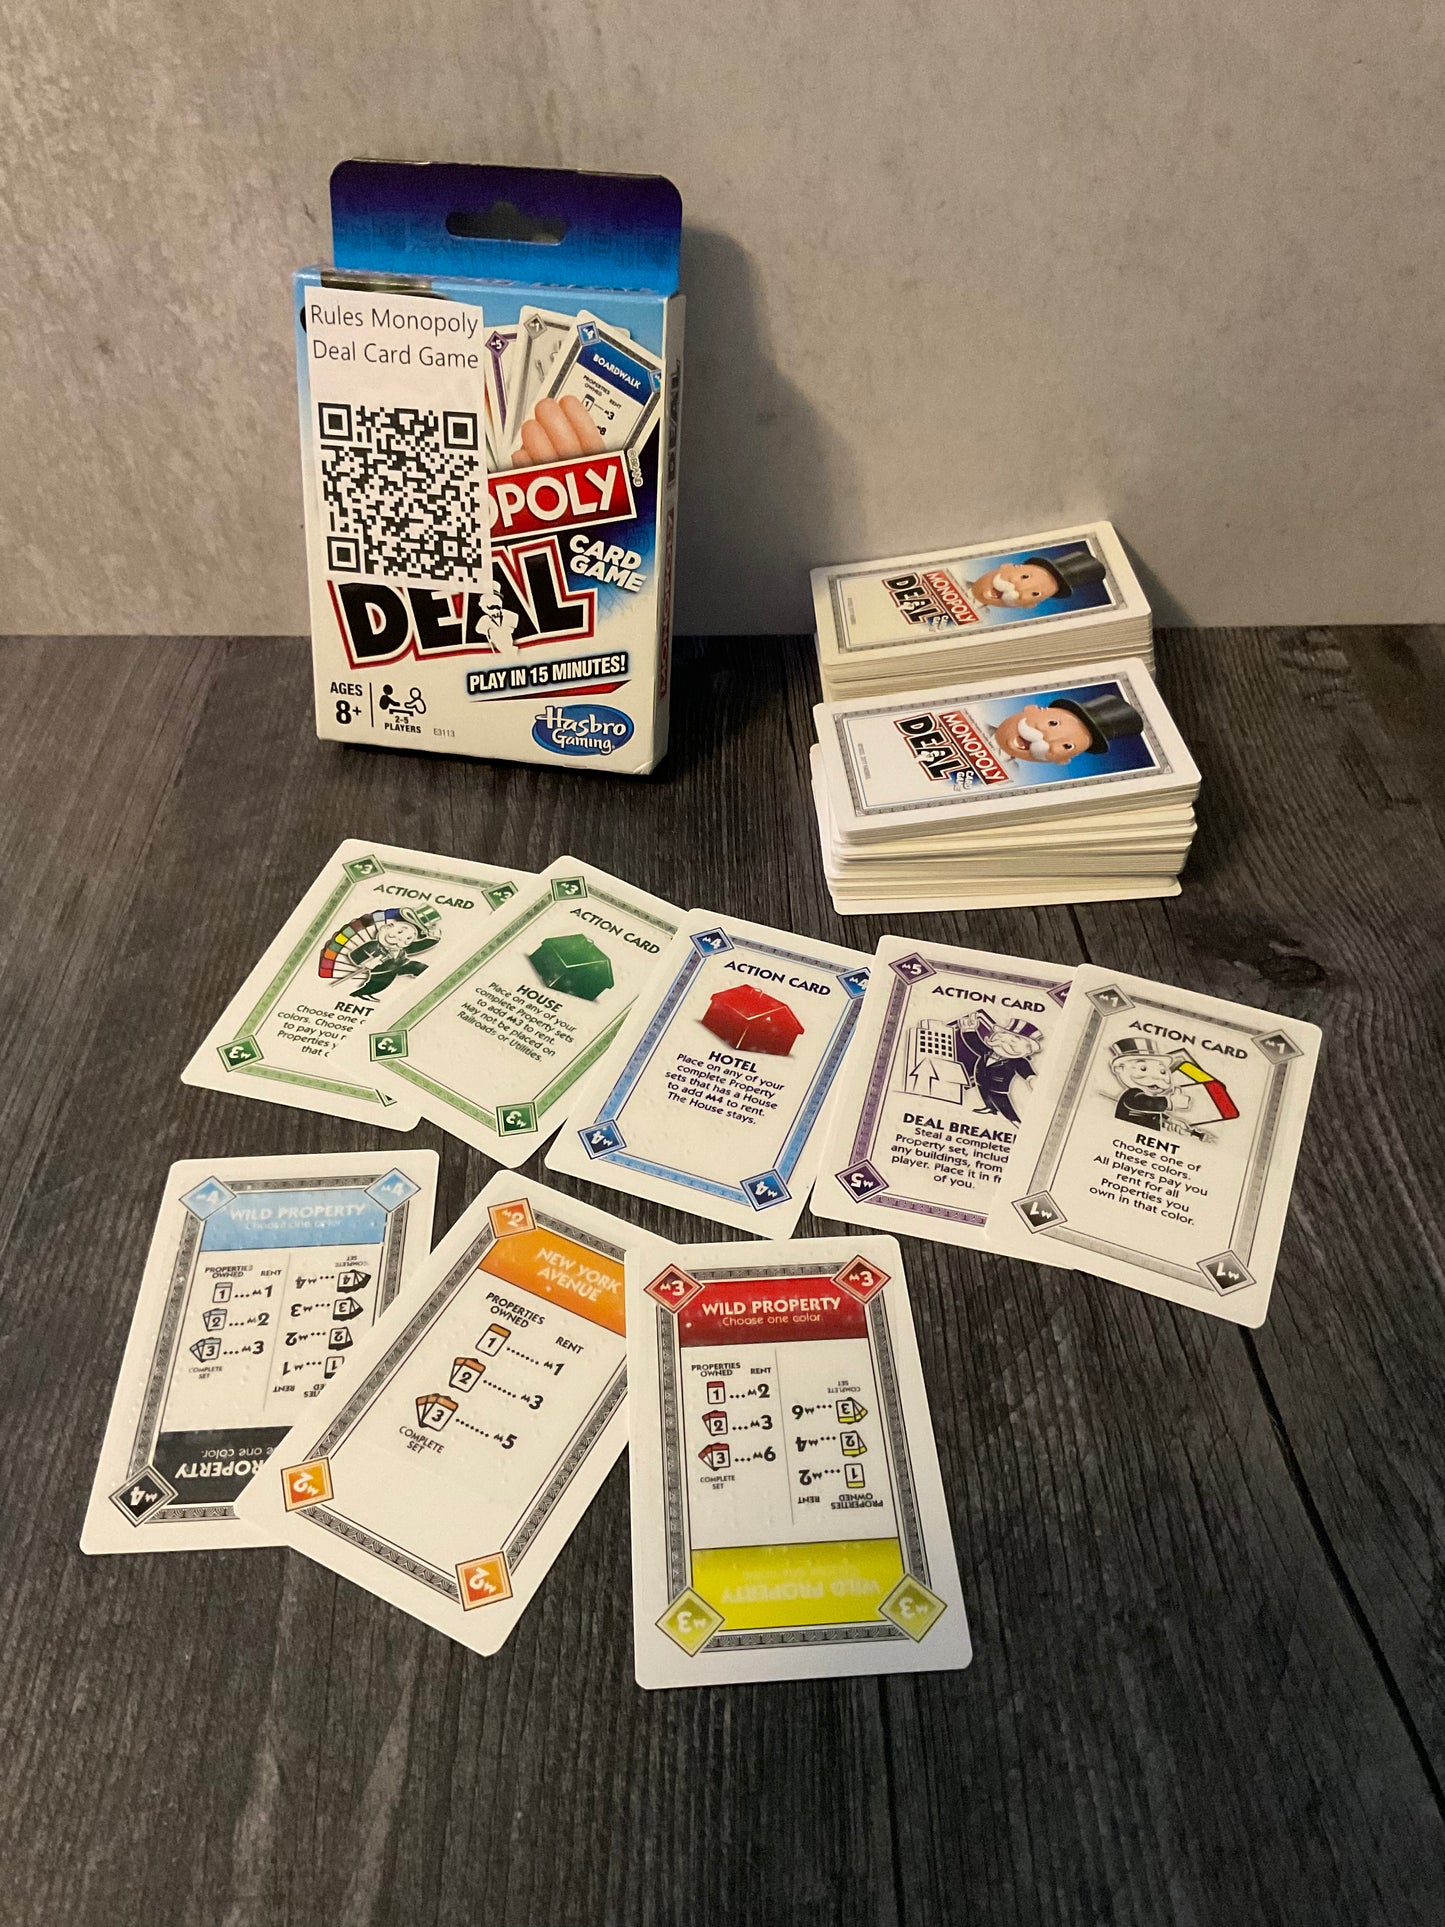 Monopoly Deal game with braille on it. All the types of cards are shown.